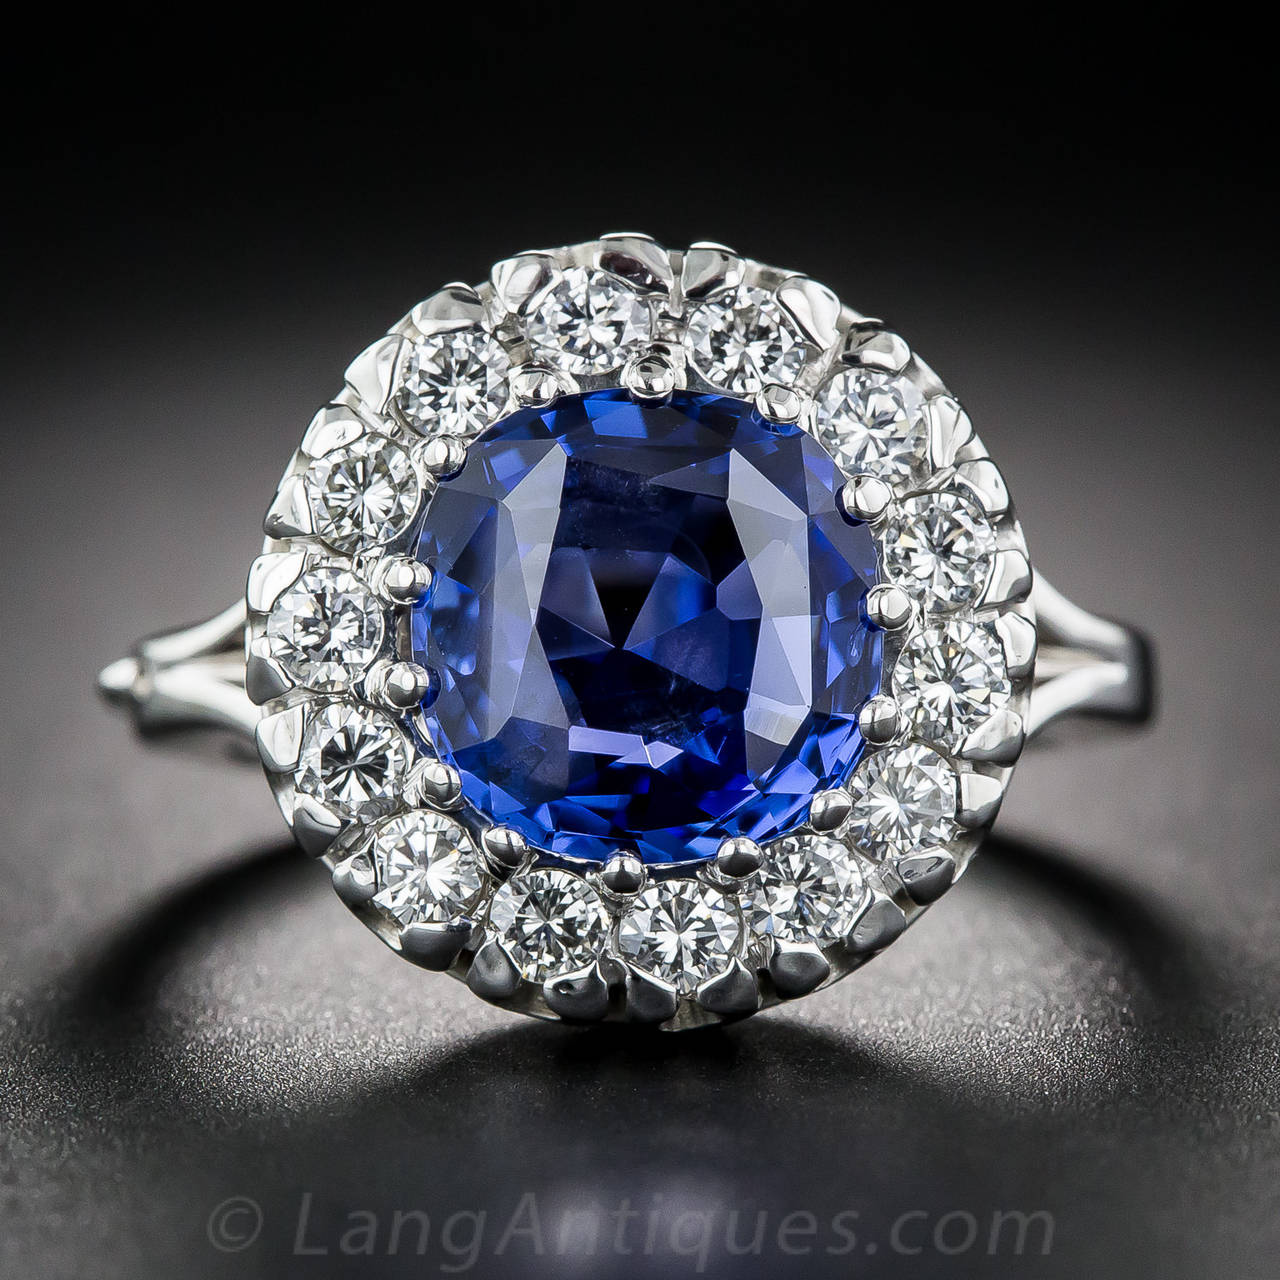 A fine blue, untreated sapphire is elegantly surrounded with a frame of sparkling white diamonds in this classic 'Lady Di' style ring, crafted in bright 14K white gold - circa mid-twentieth century. The velvety sapphire is quite extraordinary